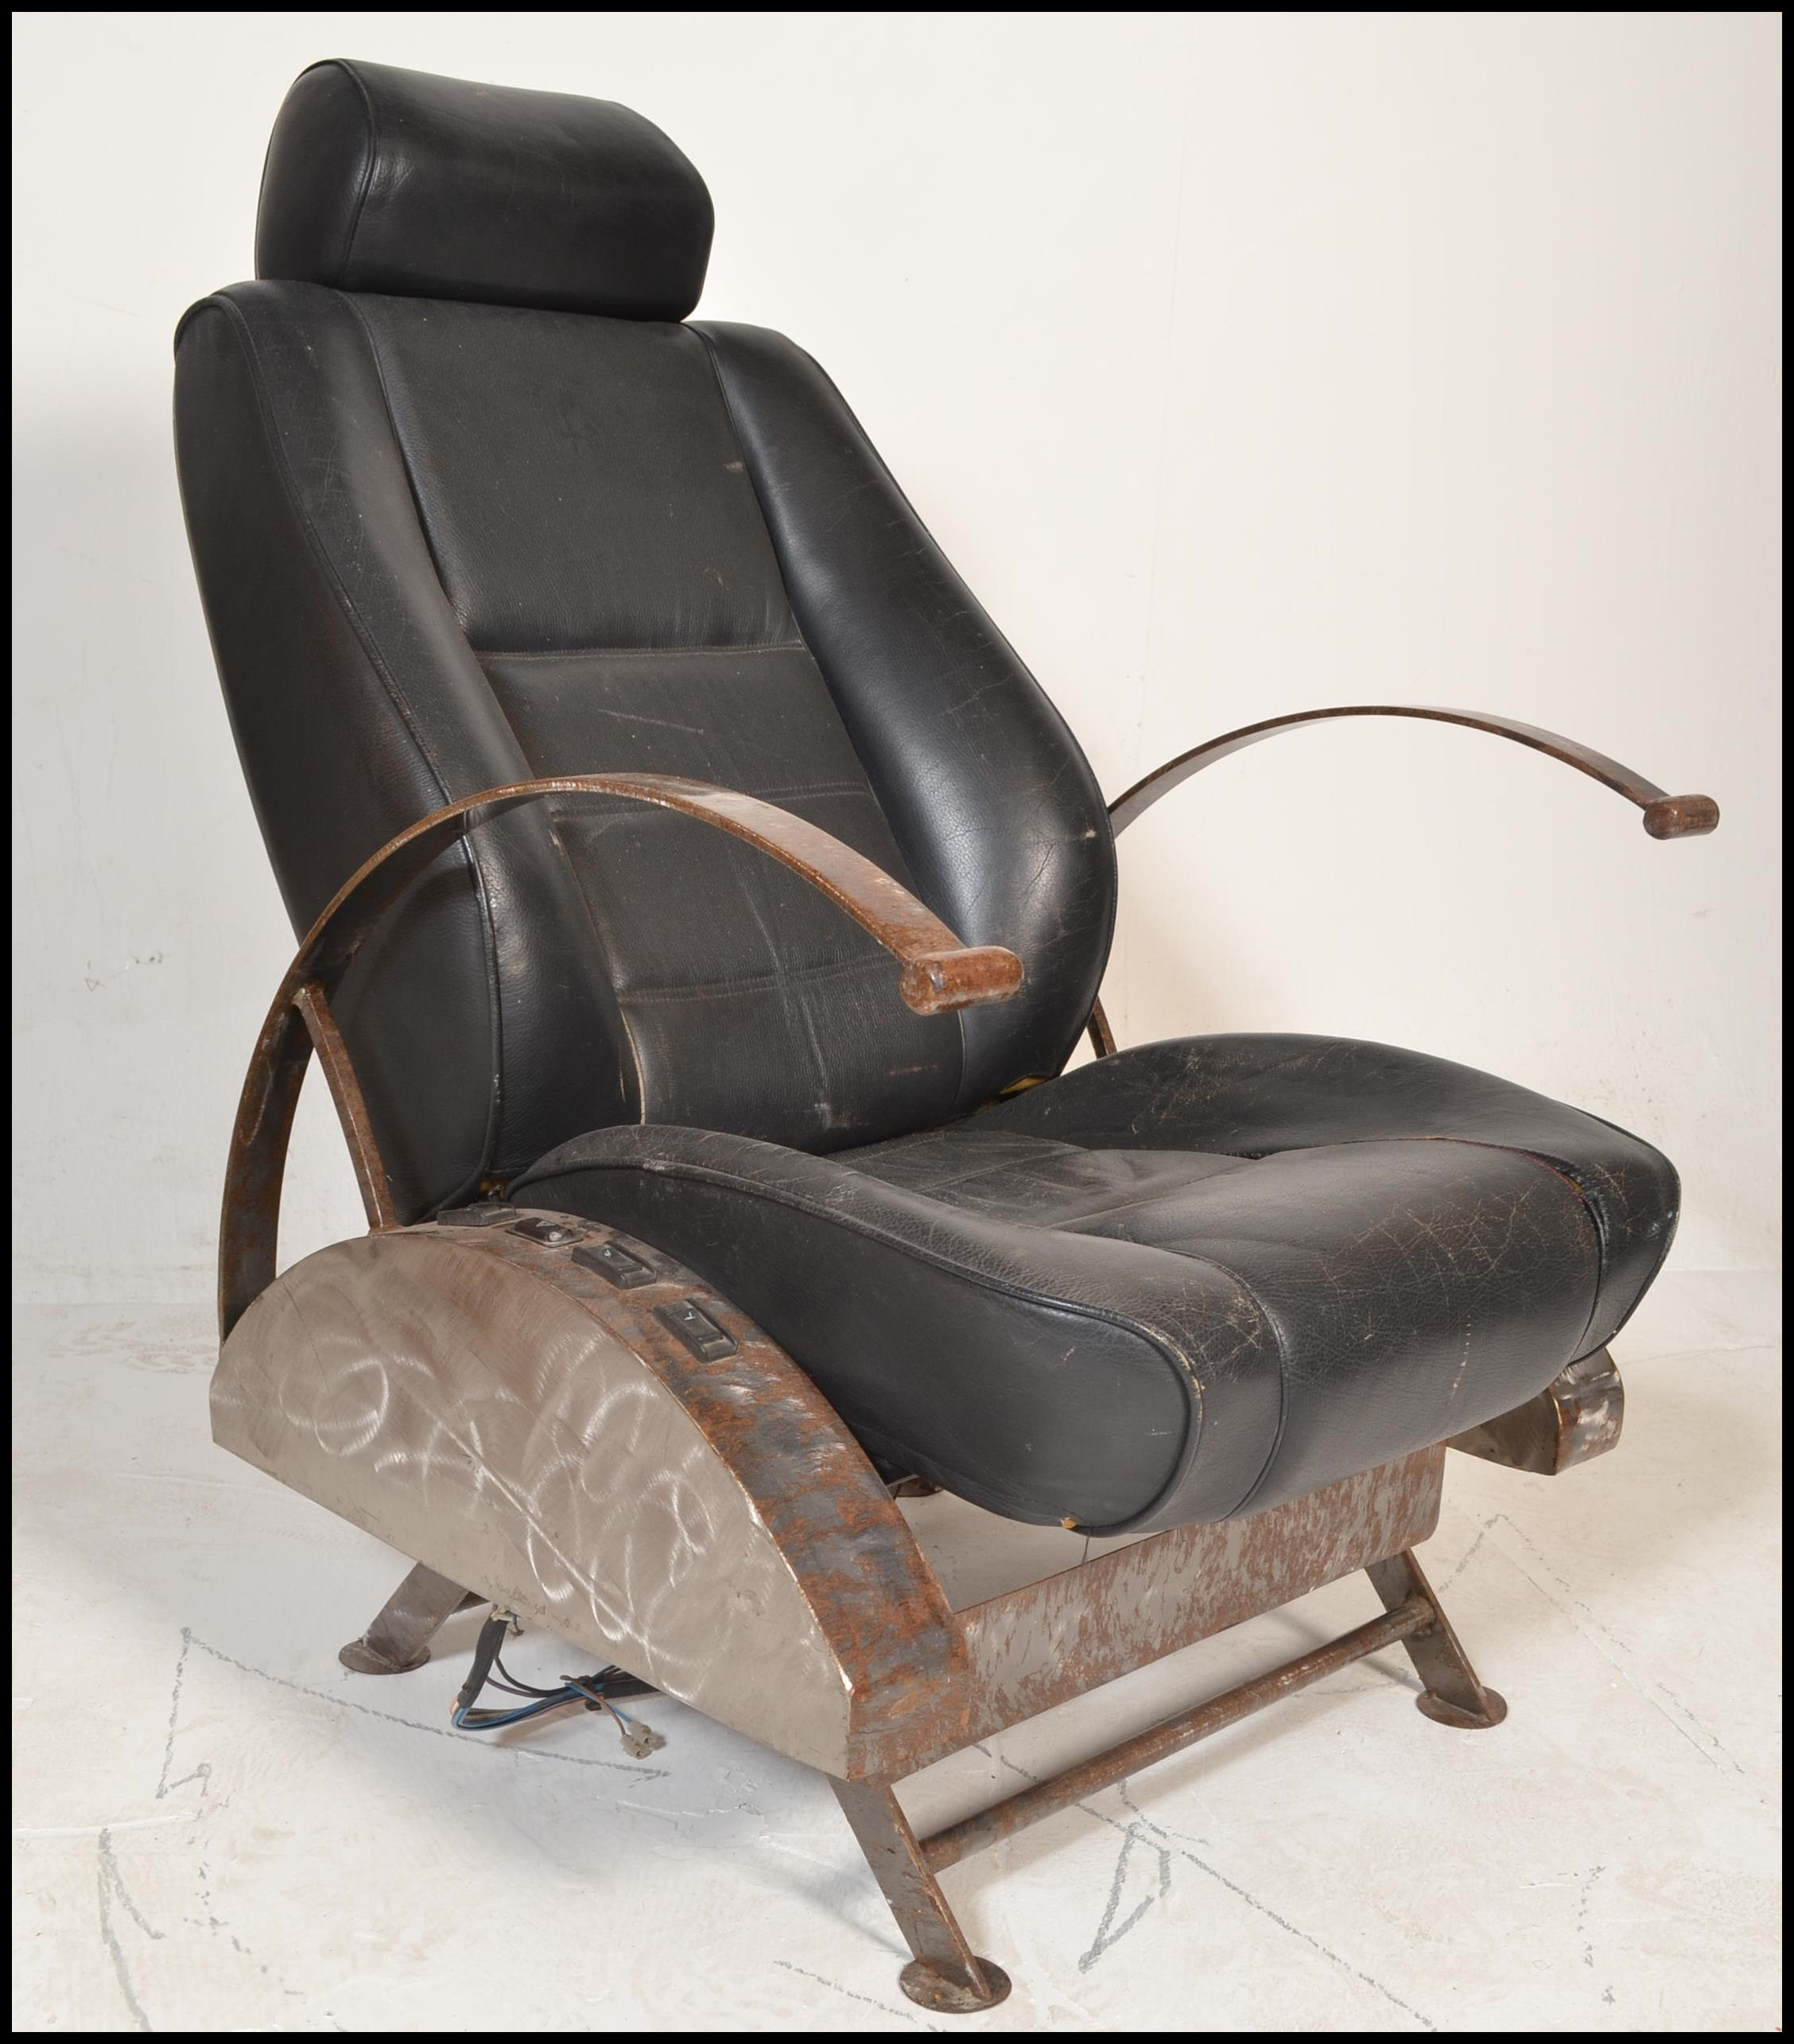 A retro 20th century car chair converted into a re